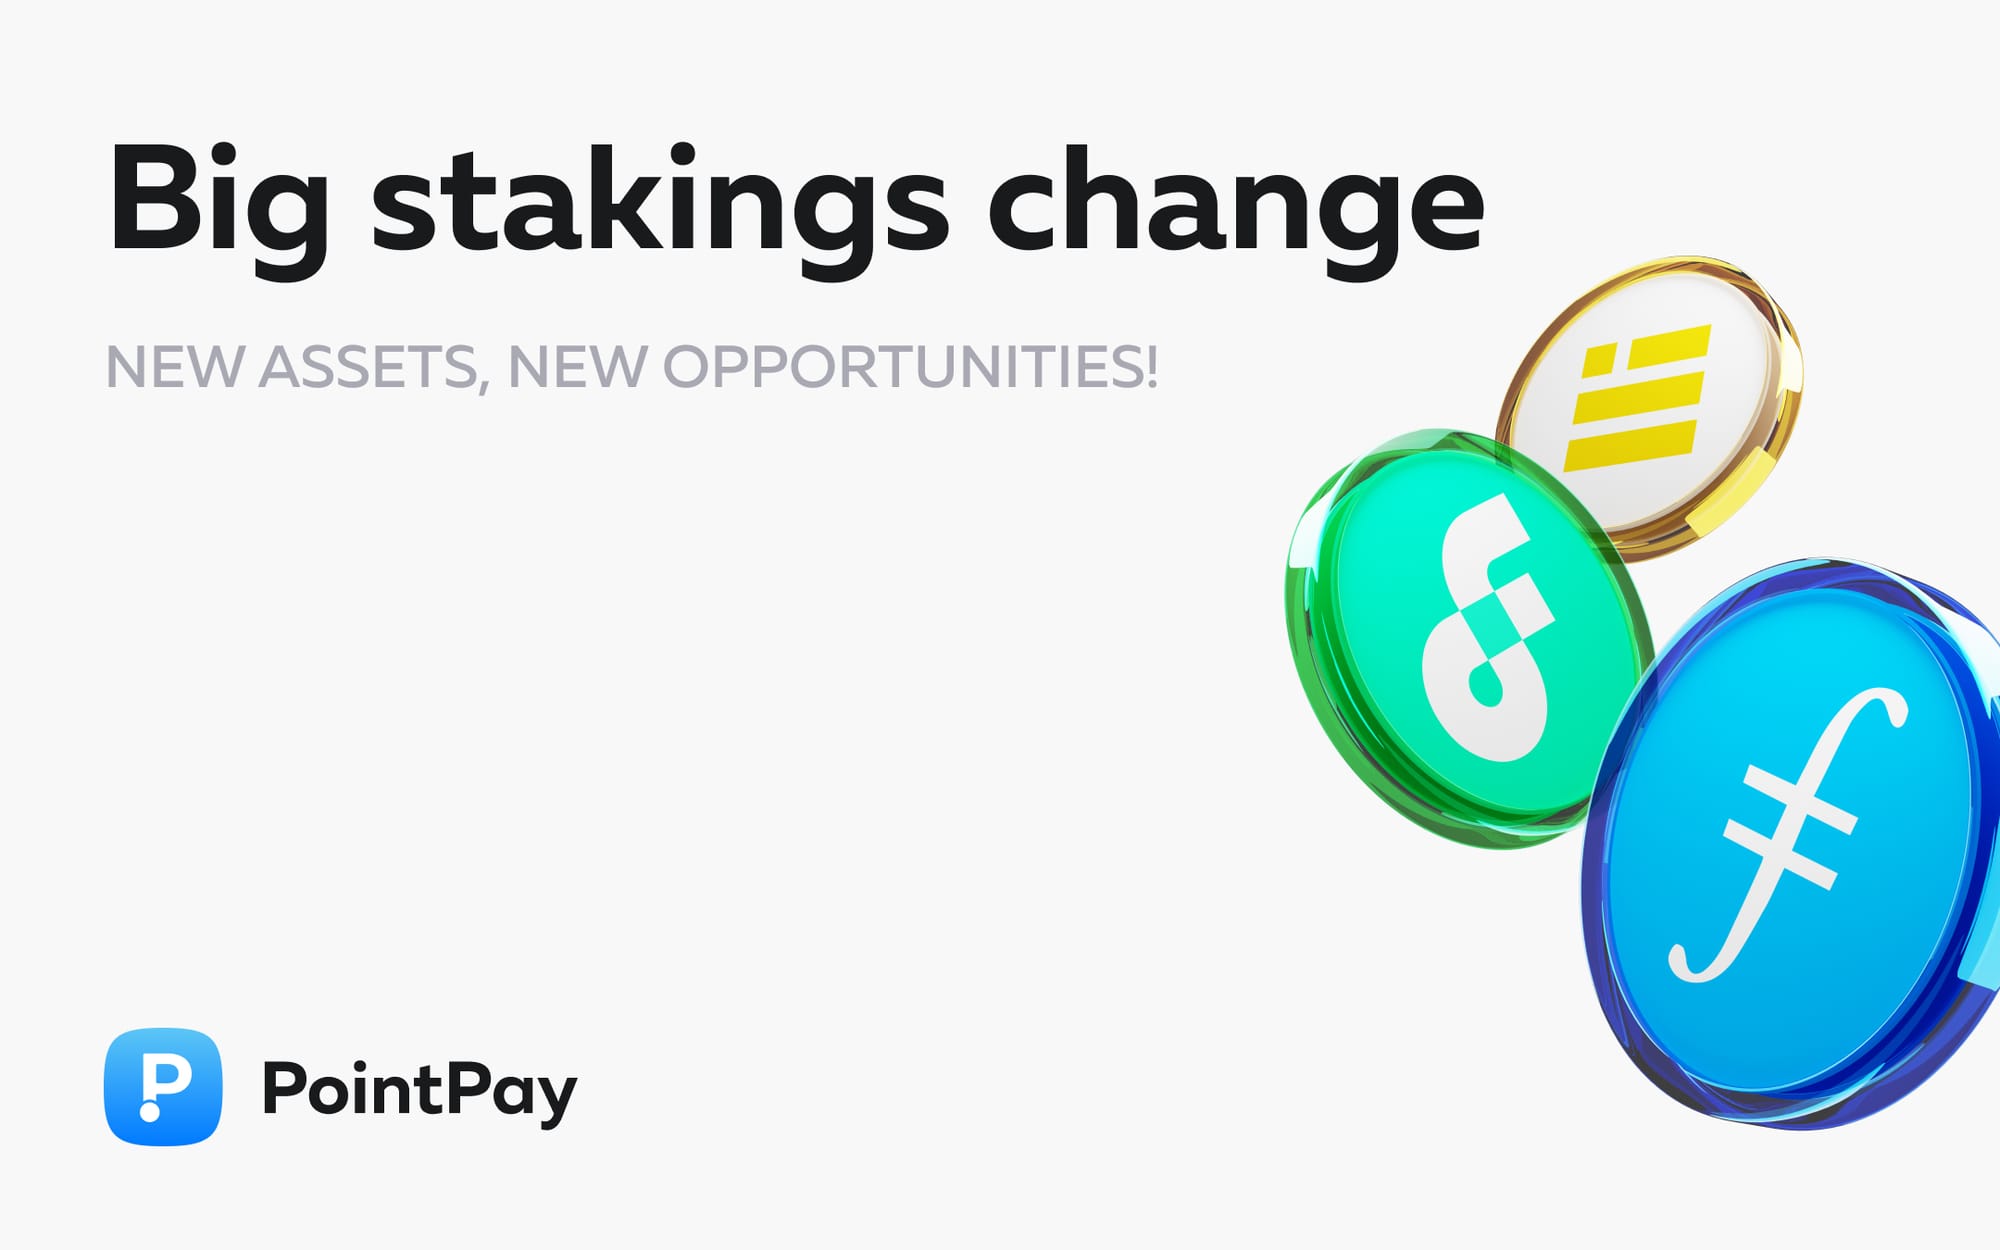 Time to Refresh Our Staking Options!